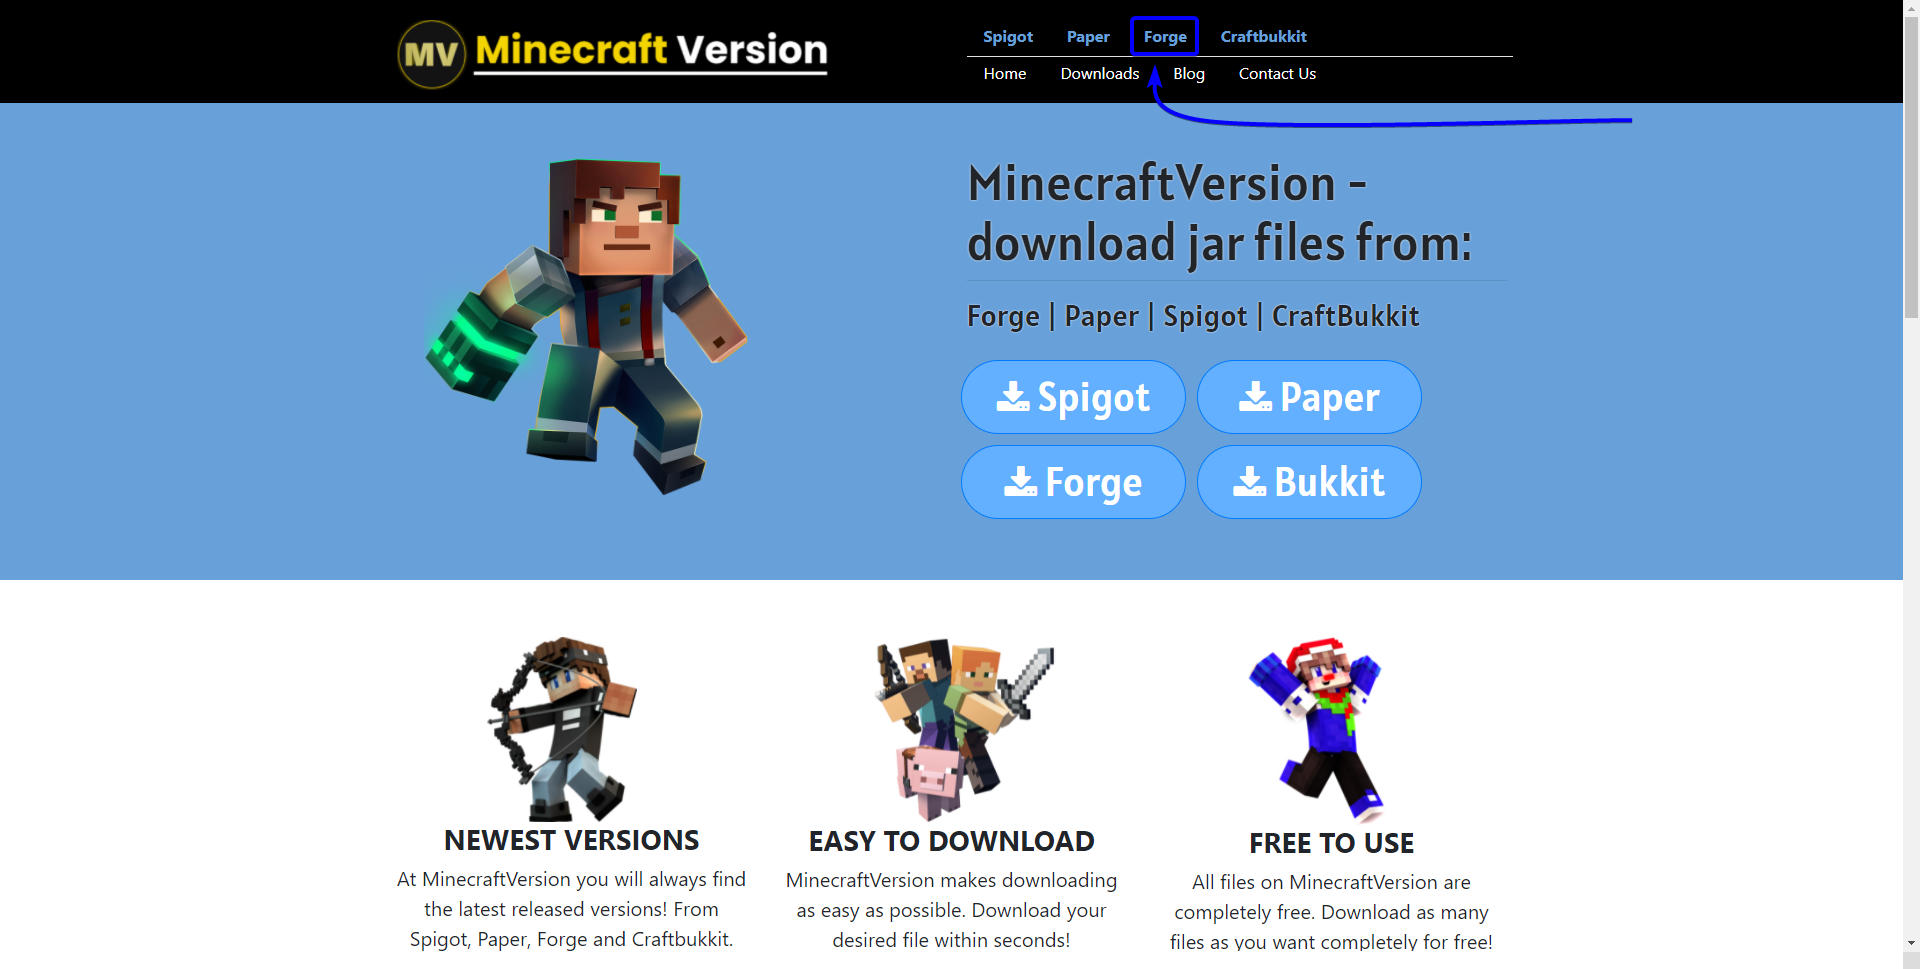 Go to Forge download page